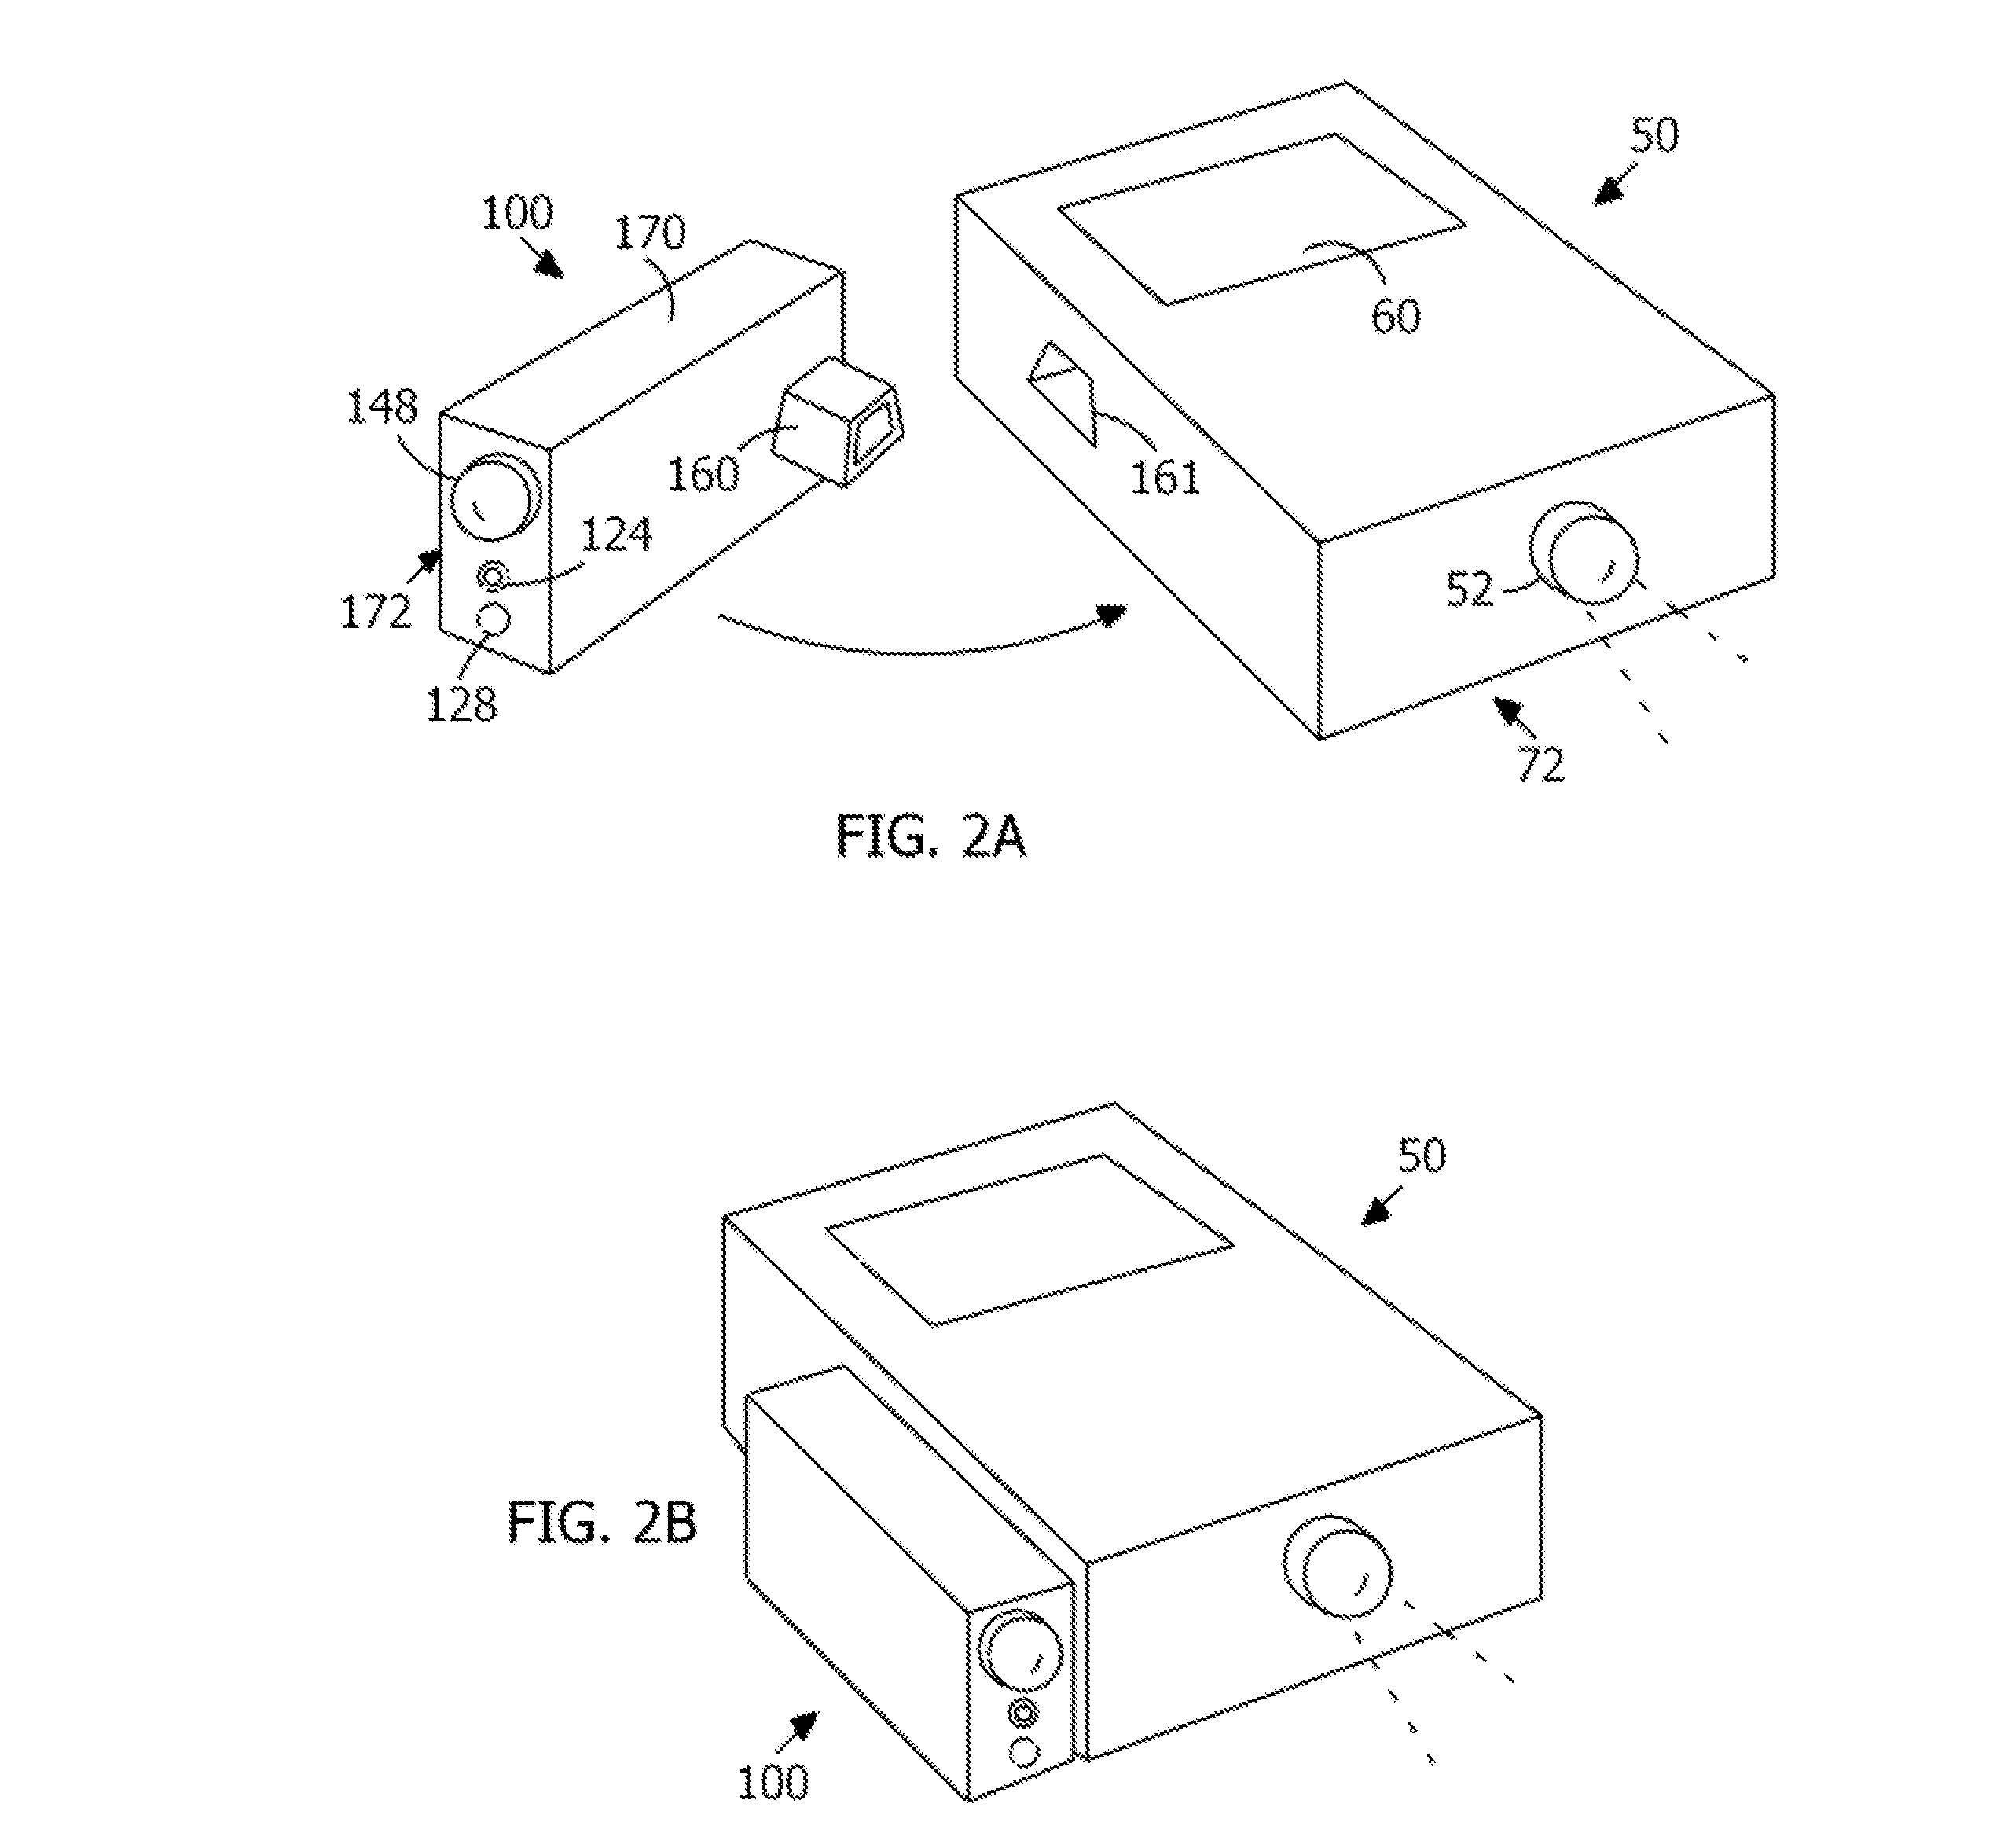 Spatially aware pointer for mobile appliances